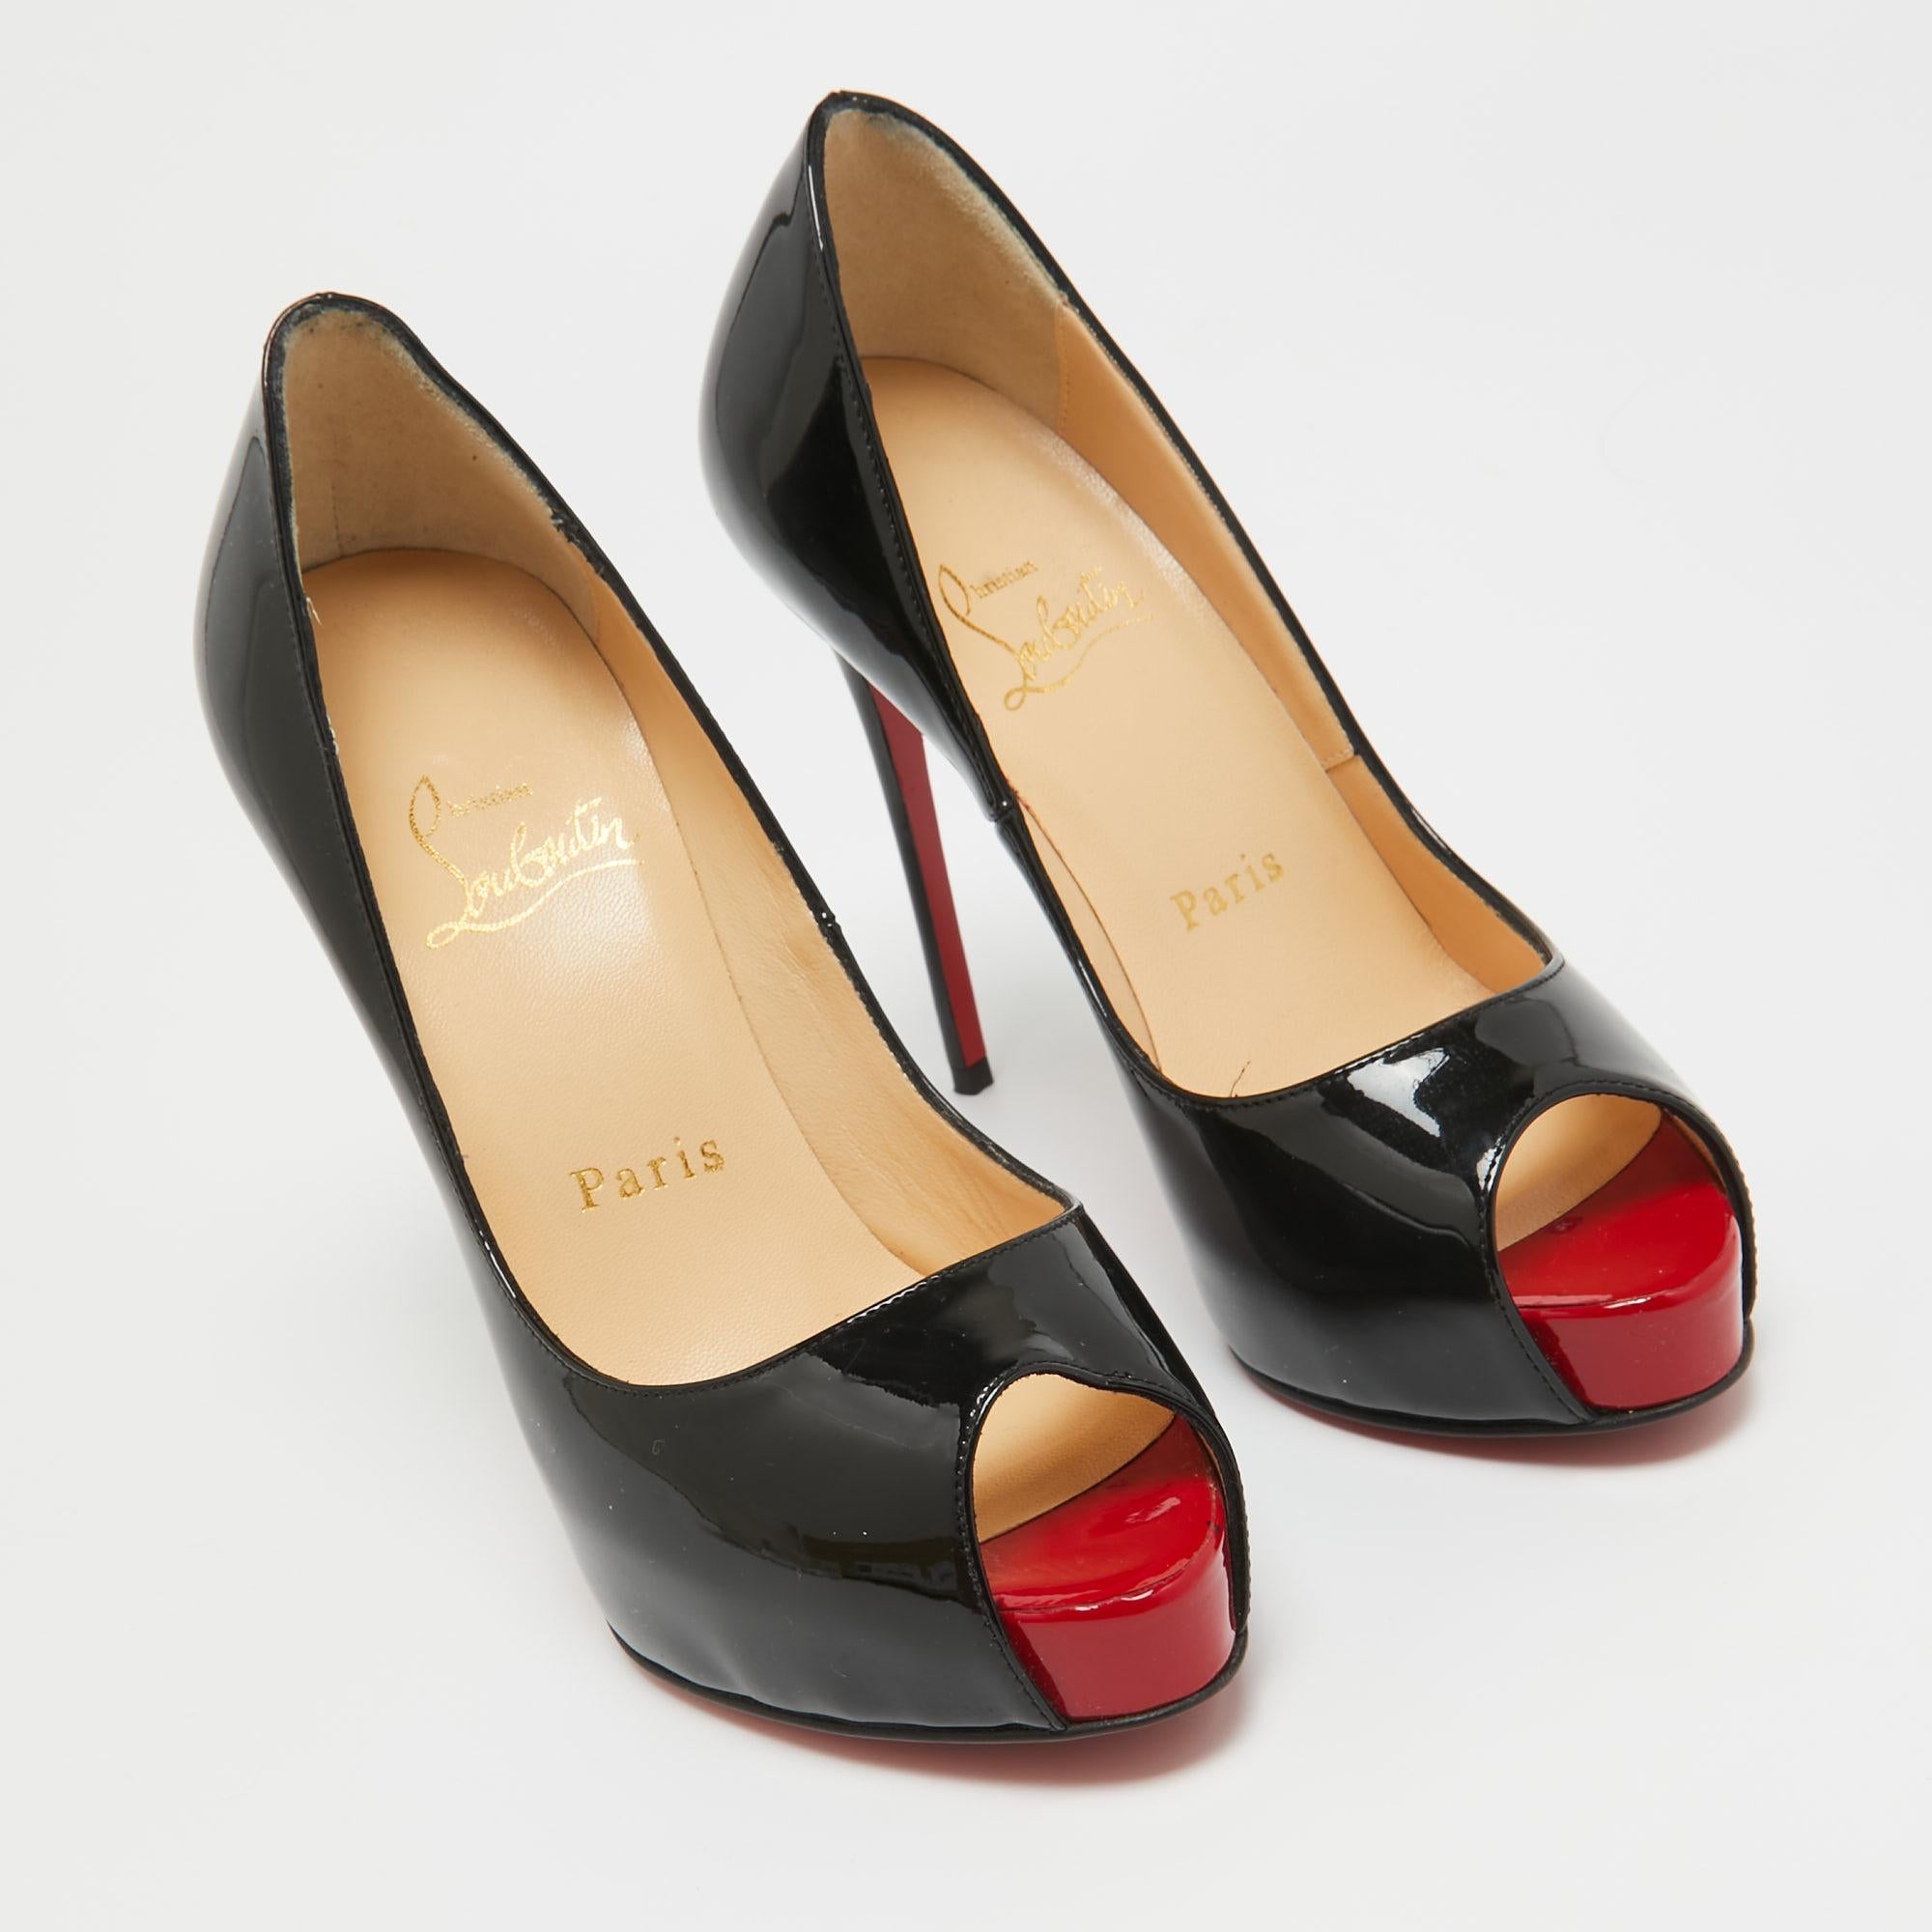 Christian Louboutin Black Patent Leather Very Prive Pumps Size 34 For Sale 5